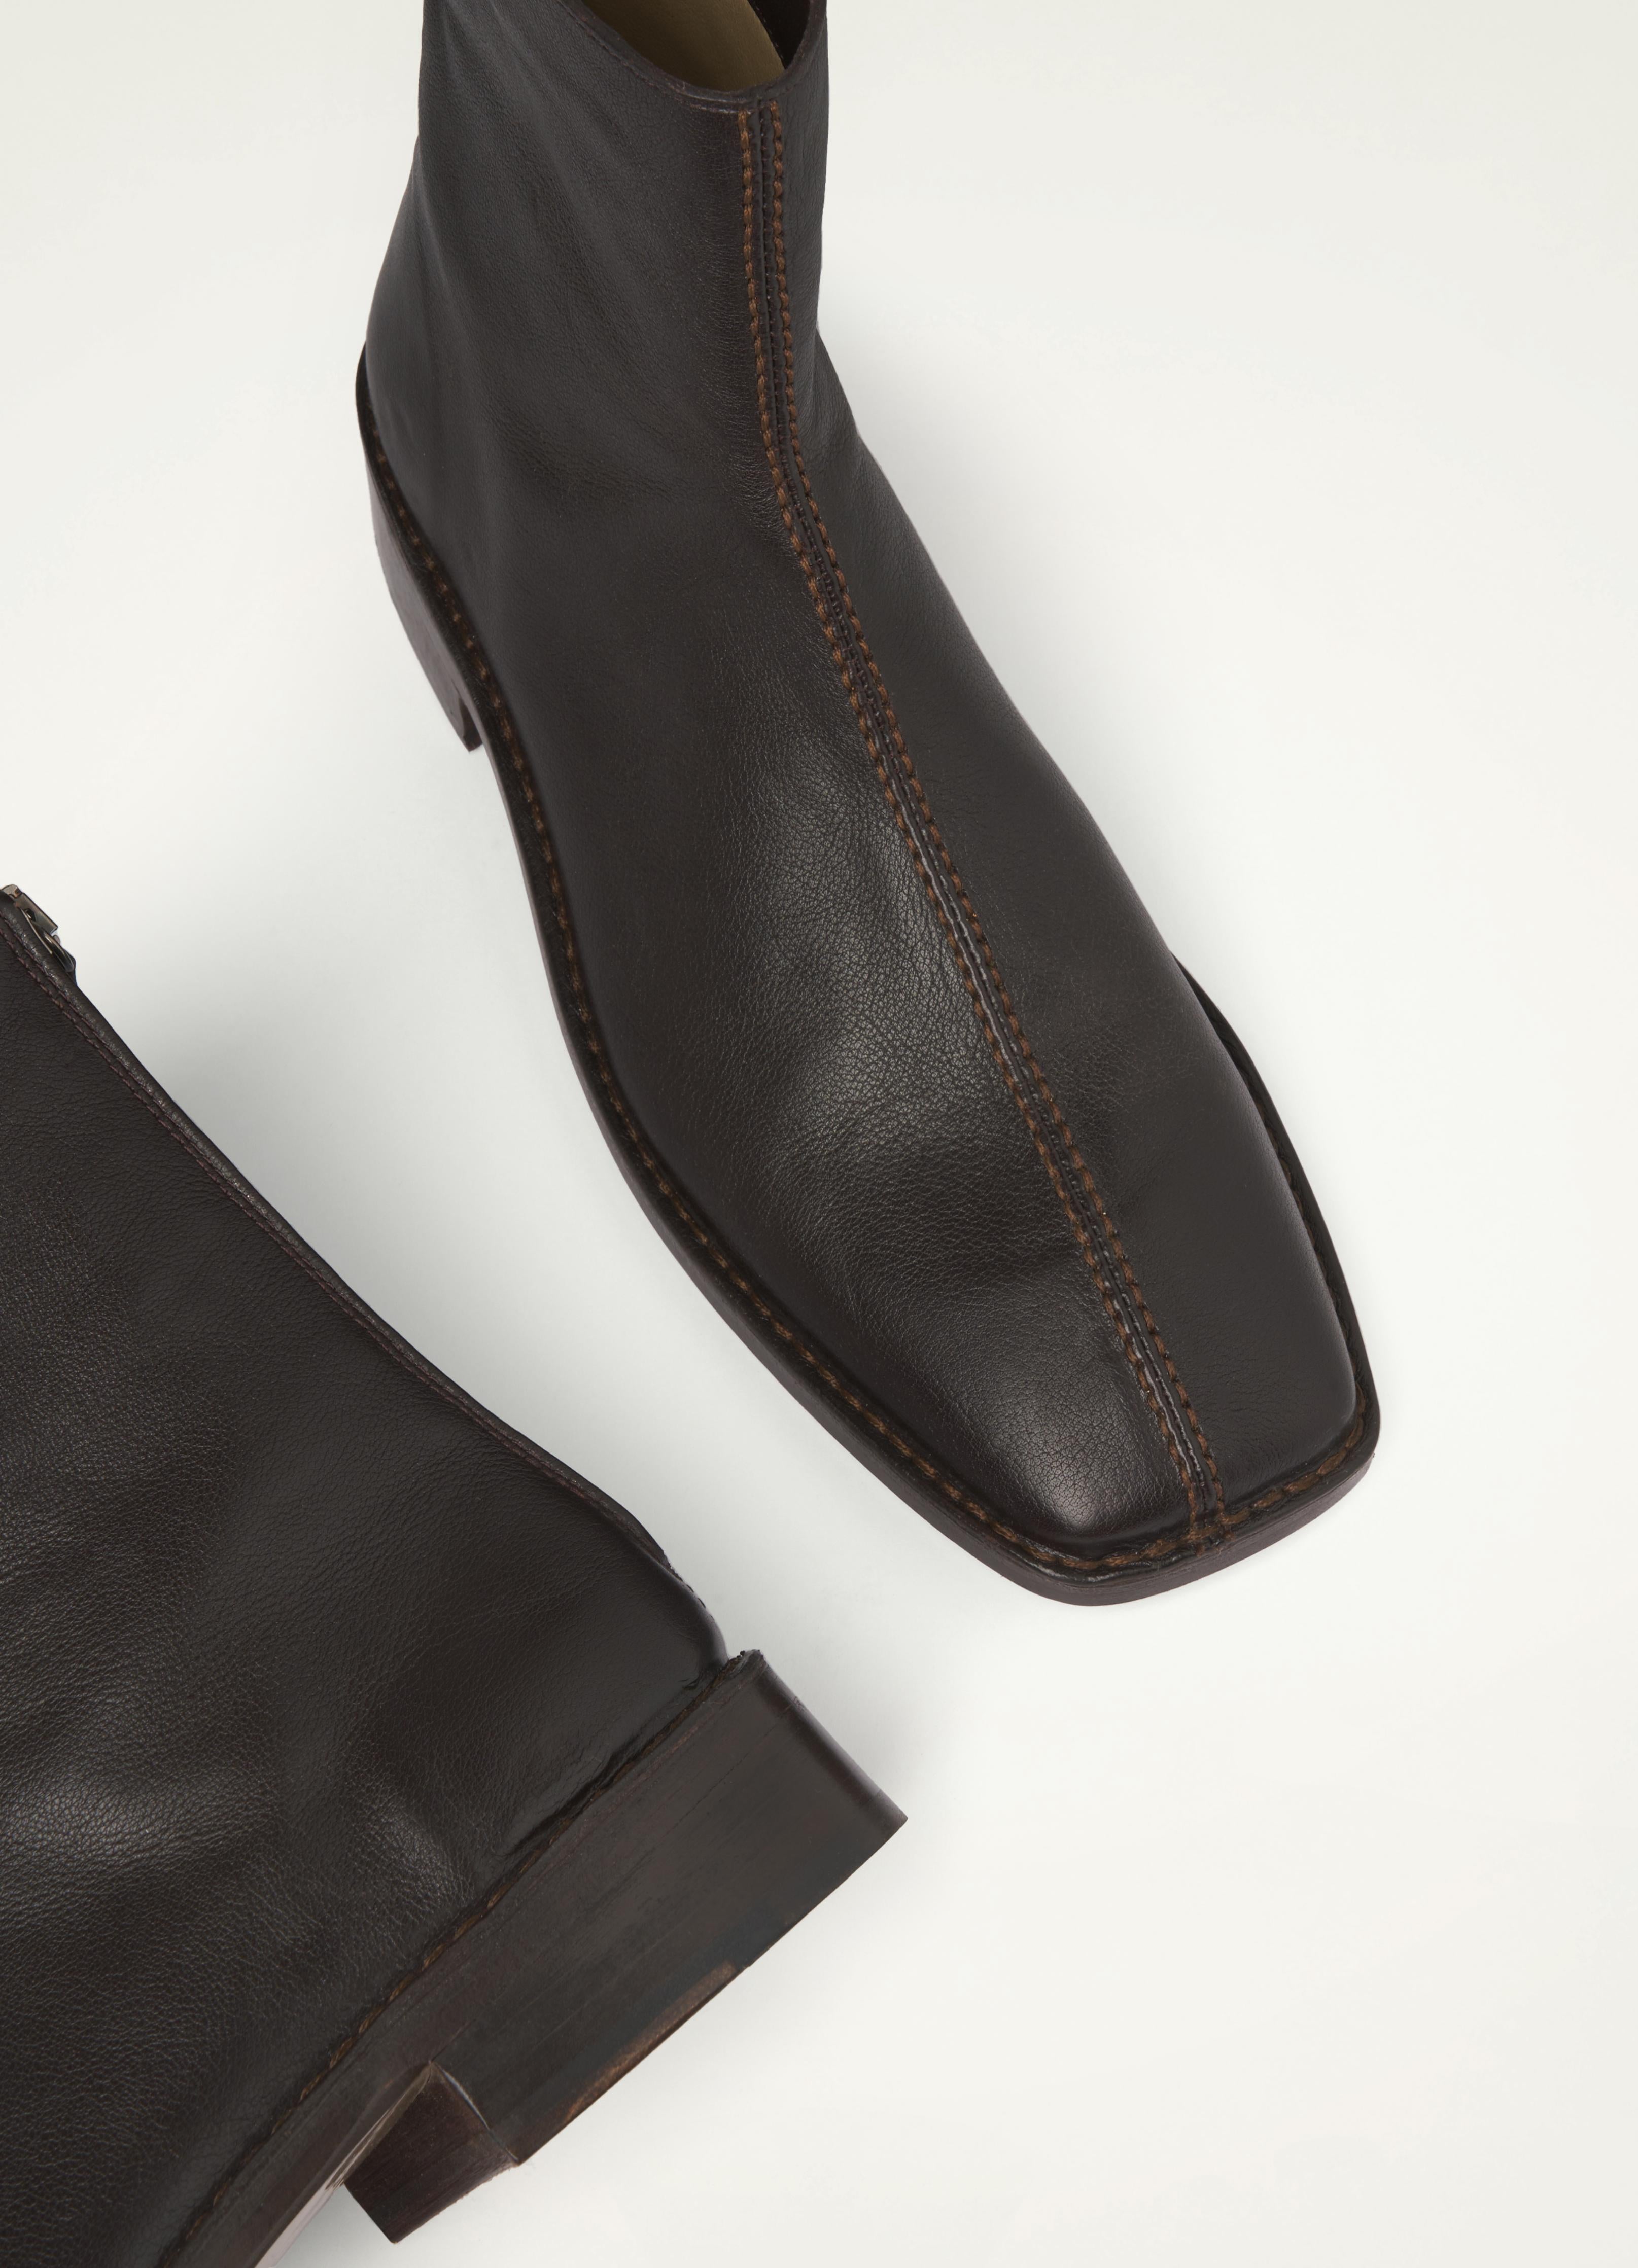 Lemaire ヒールブーツ ZIPPED BOOT 41 - ブーツ